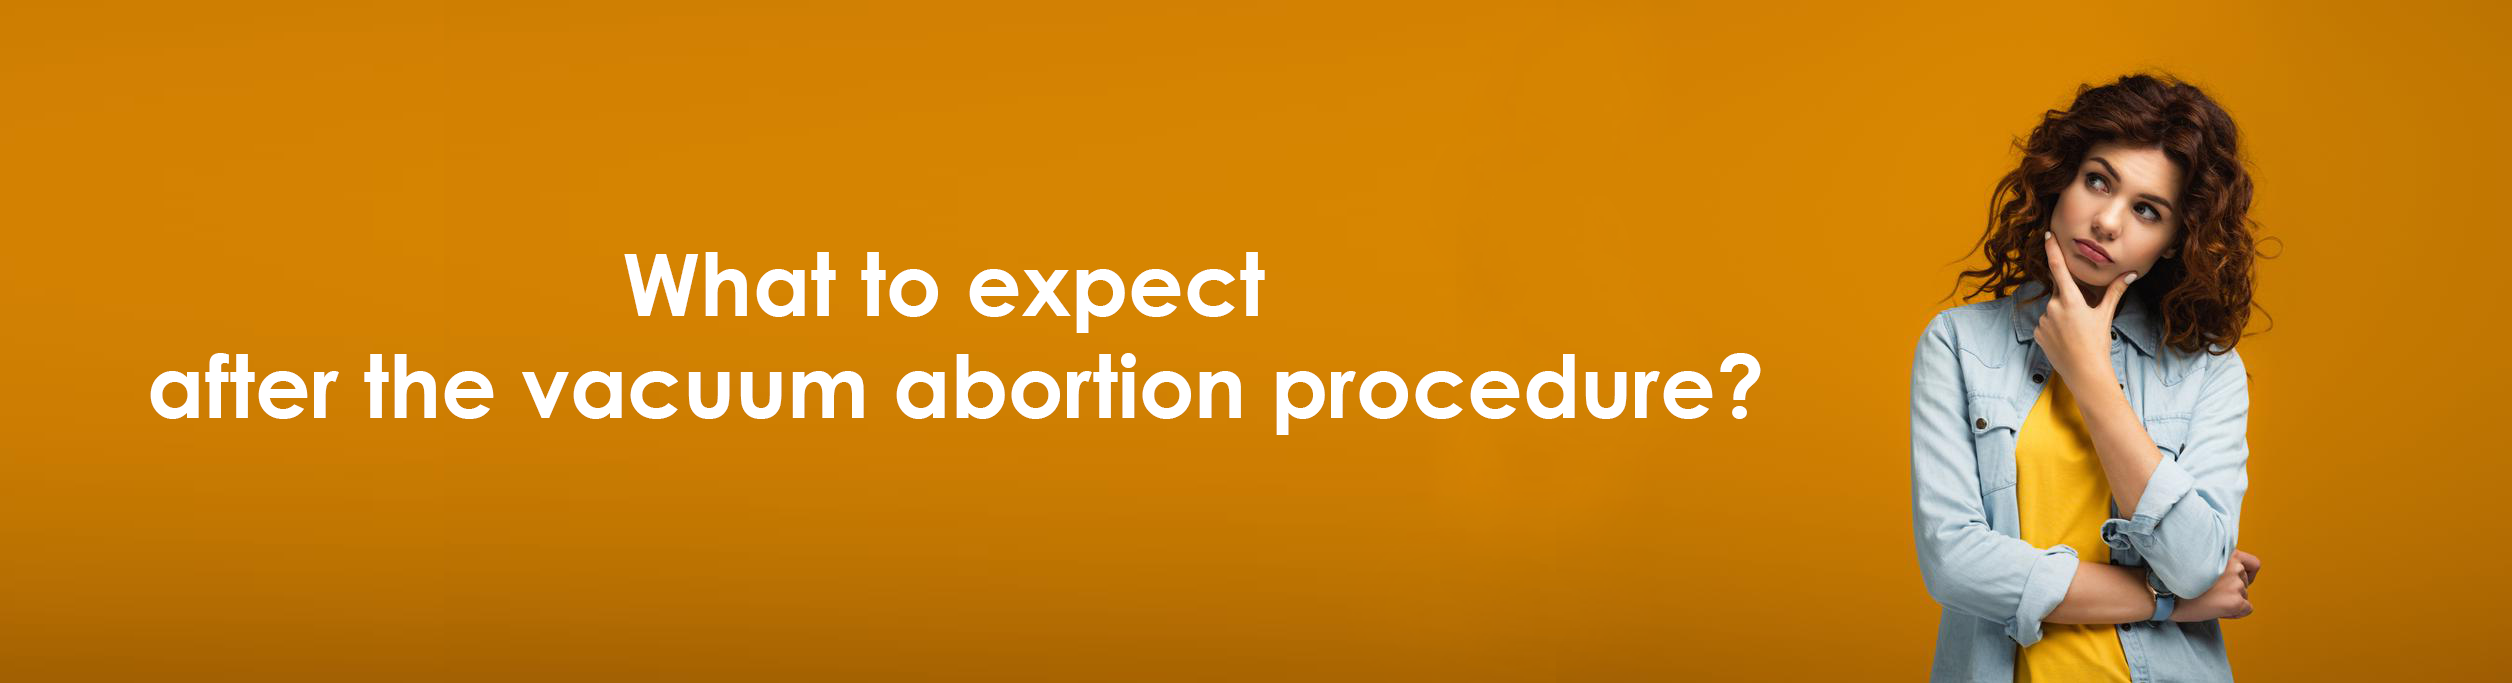 What to expect after the vacuum abortion procedure